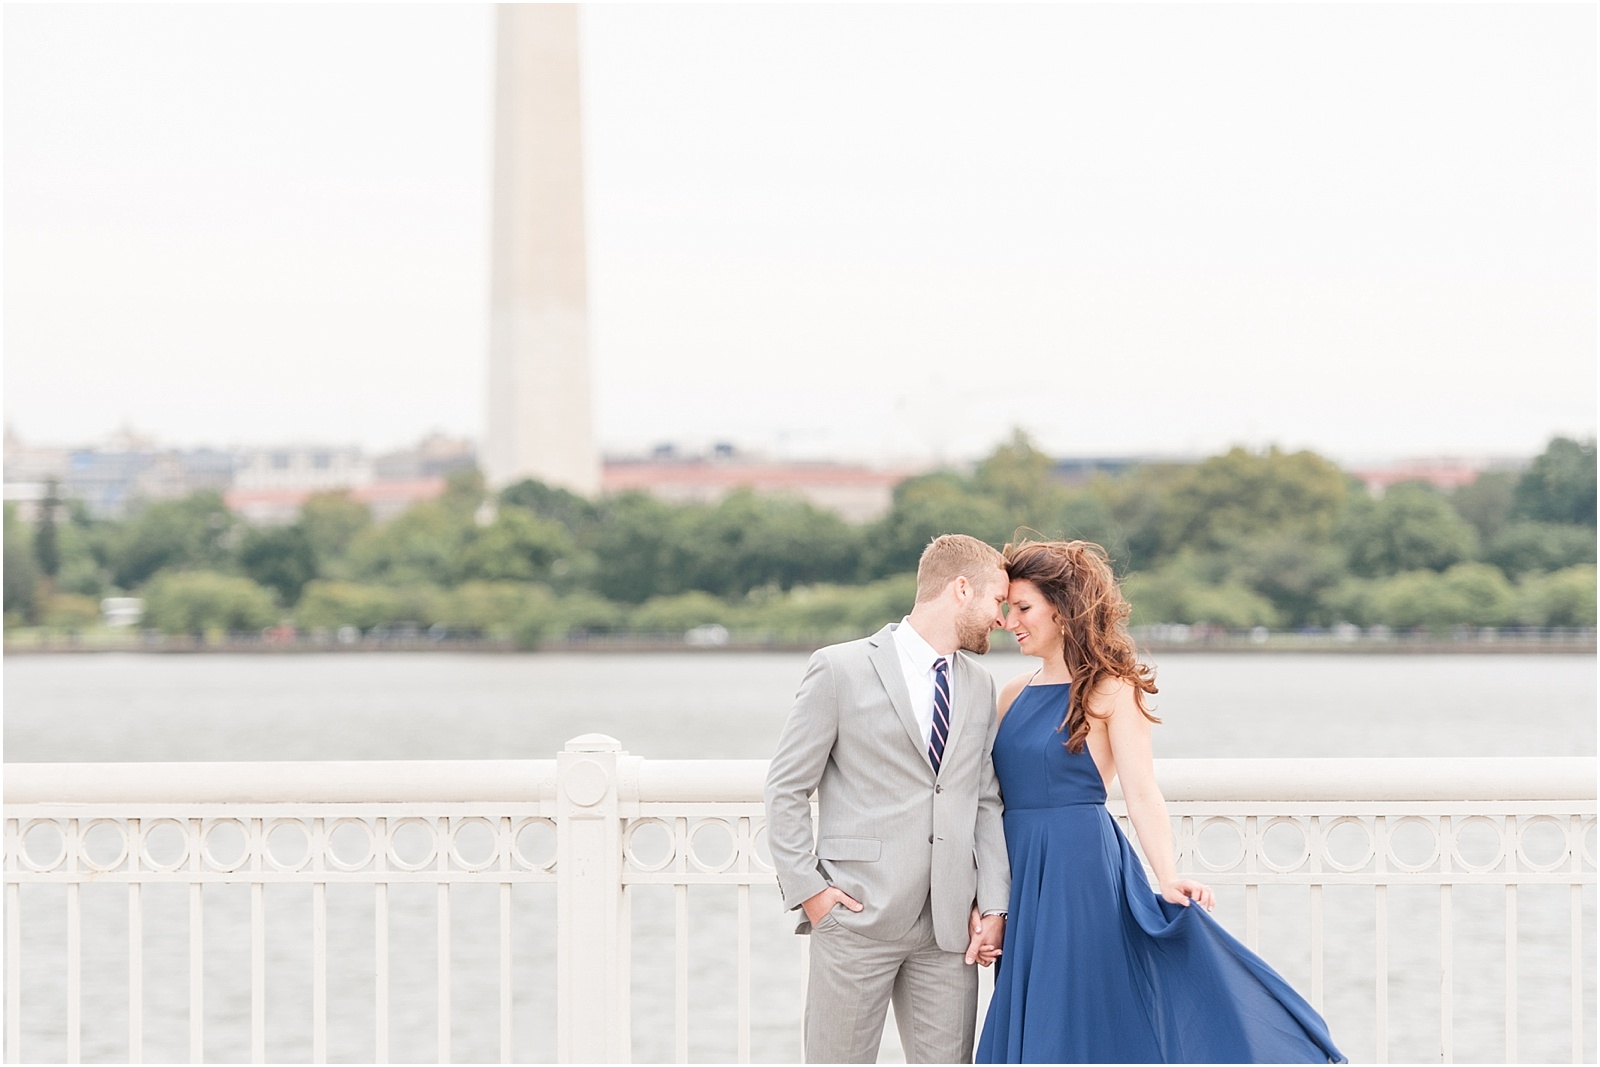 0037 Bret and Brandie Photography| Washington DC Engagement | Megan and Connor.jpg